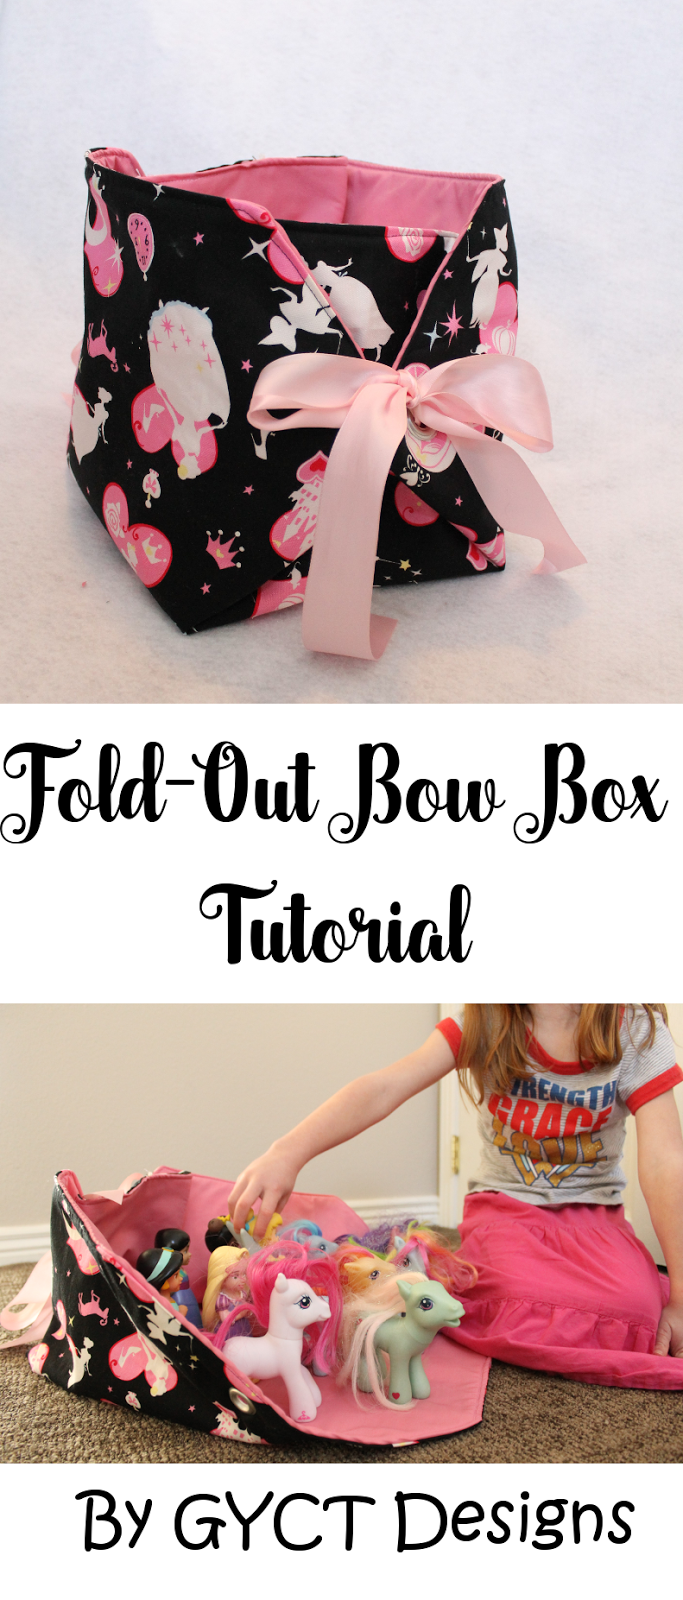 Fold-Out Bow Box Tutorial by GYCT